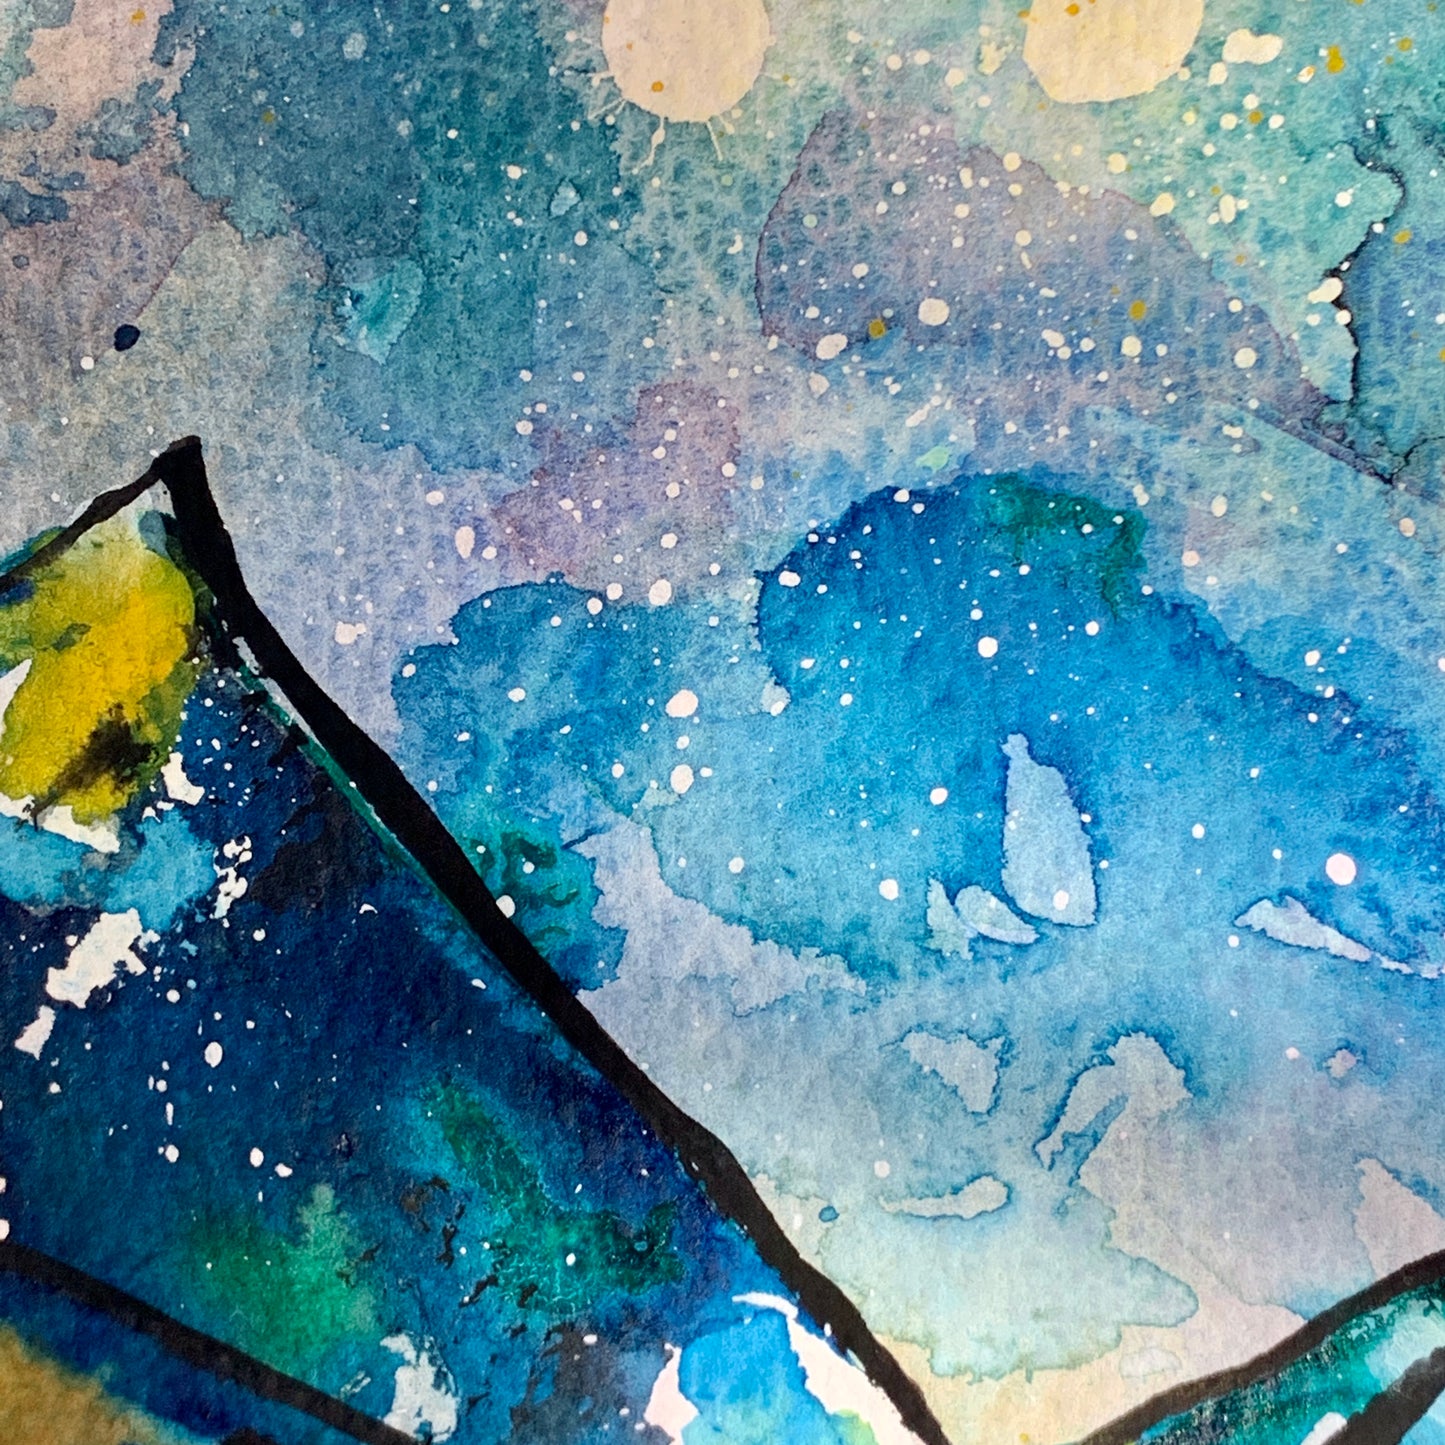 Storm and Mountains - Abstracts Series